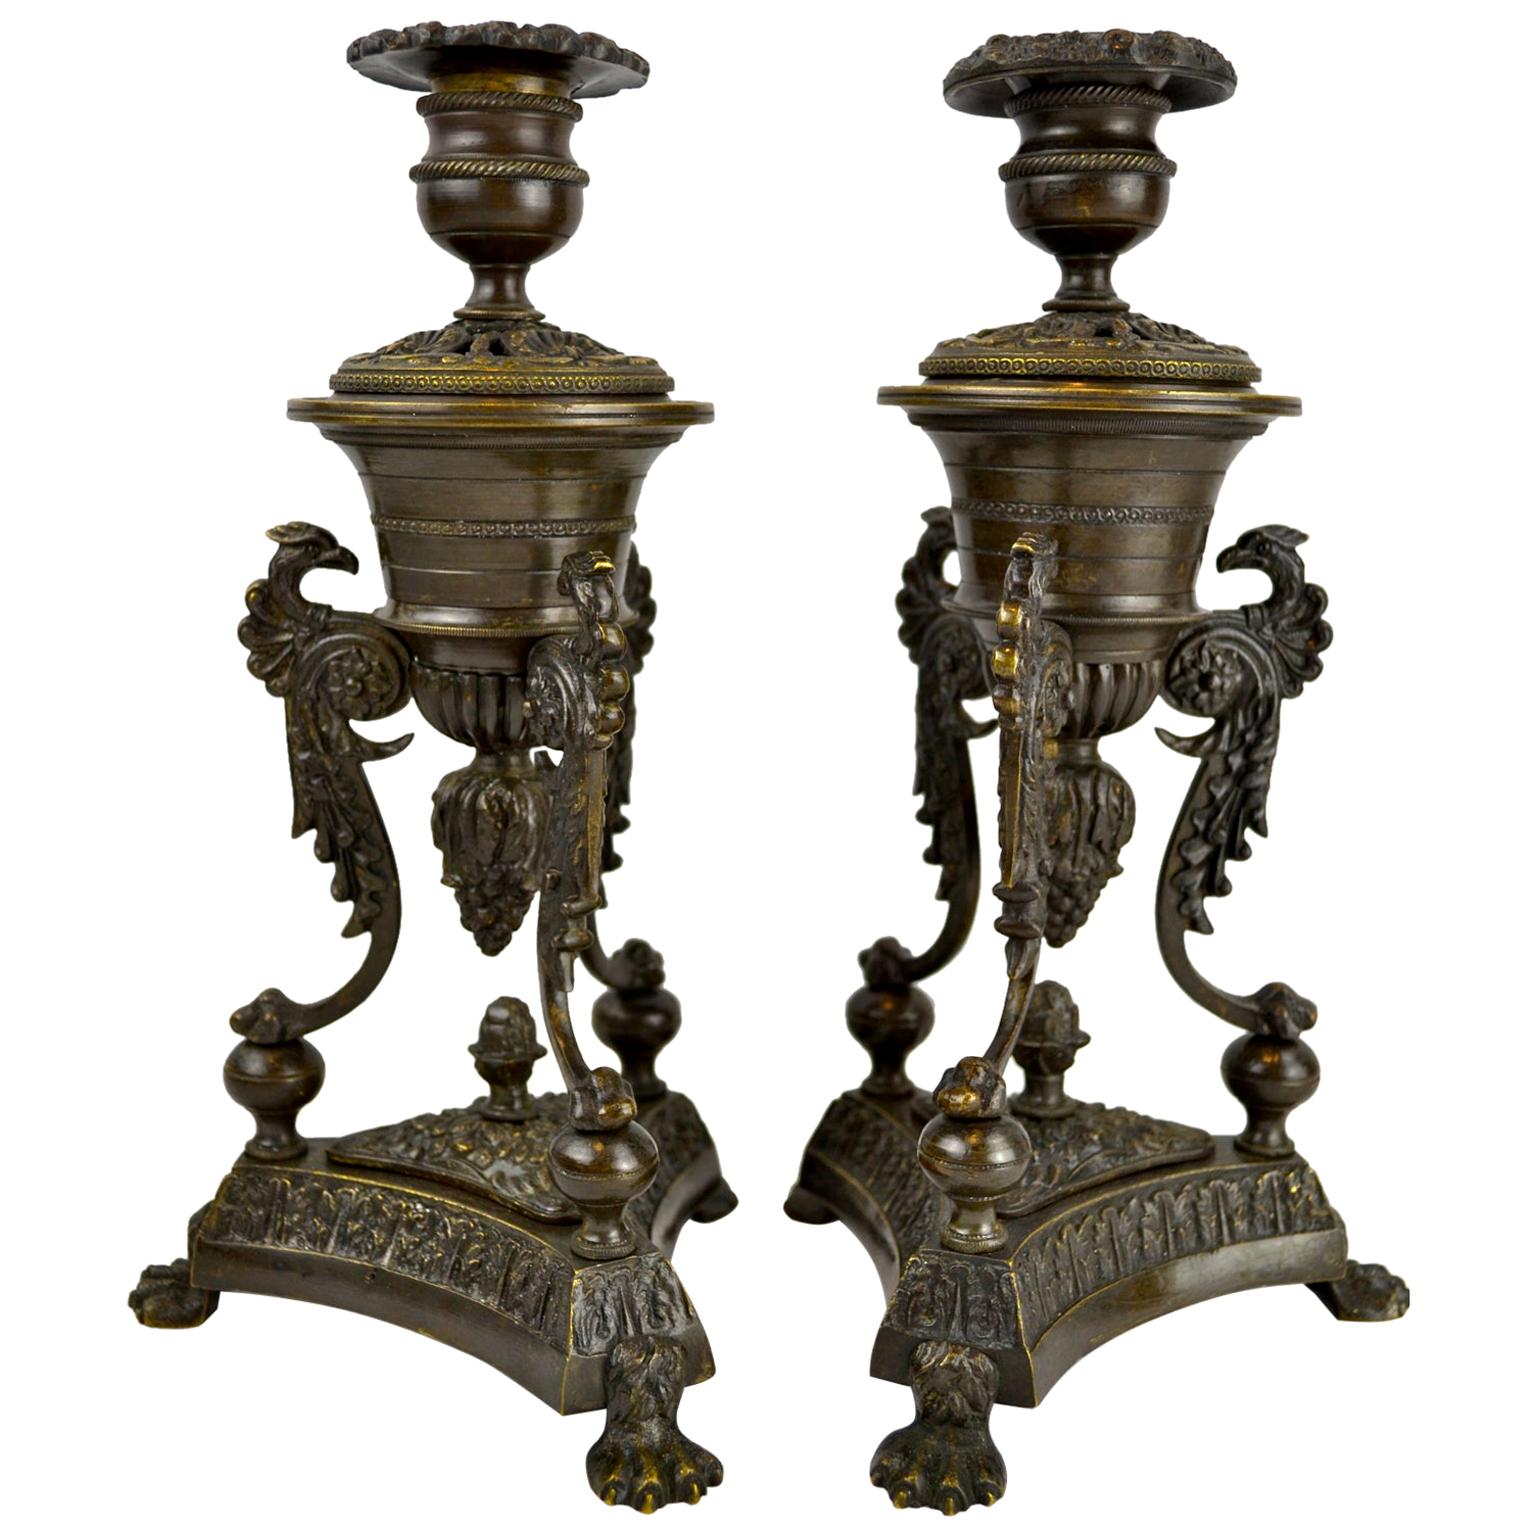 Pair of late English Regency Bronze Perfume Burners and Candlesticks